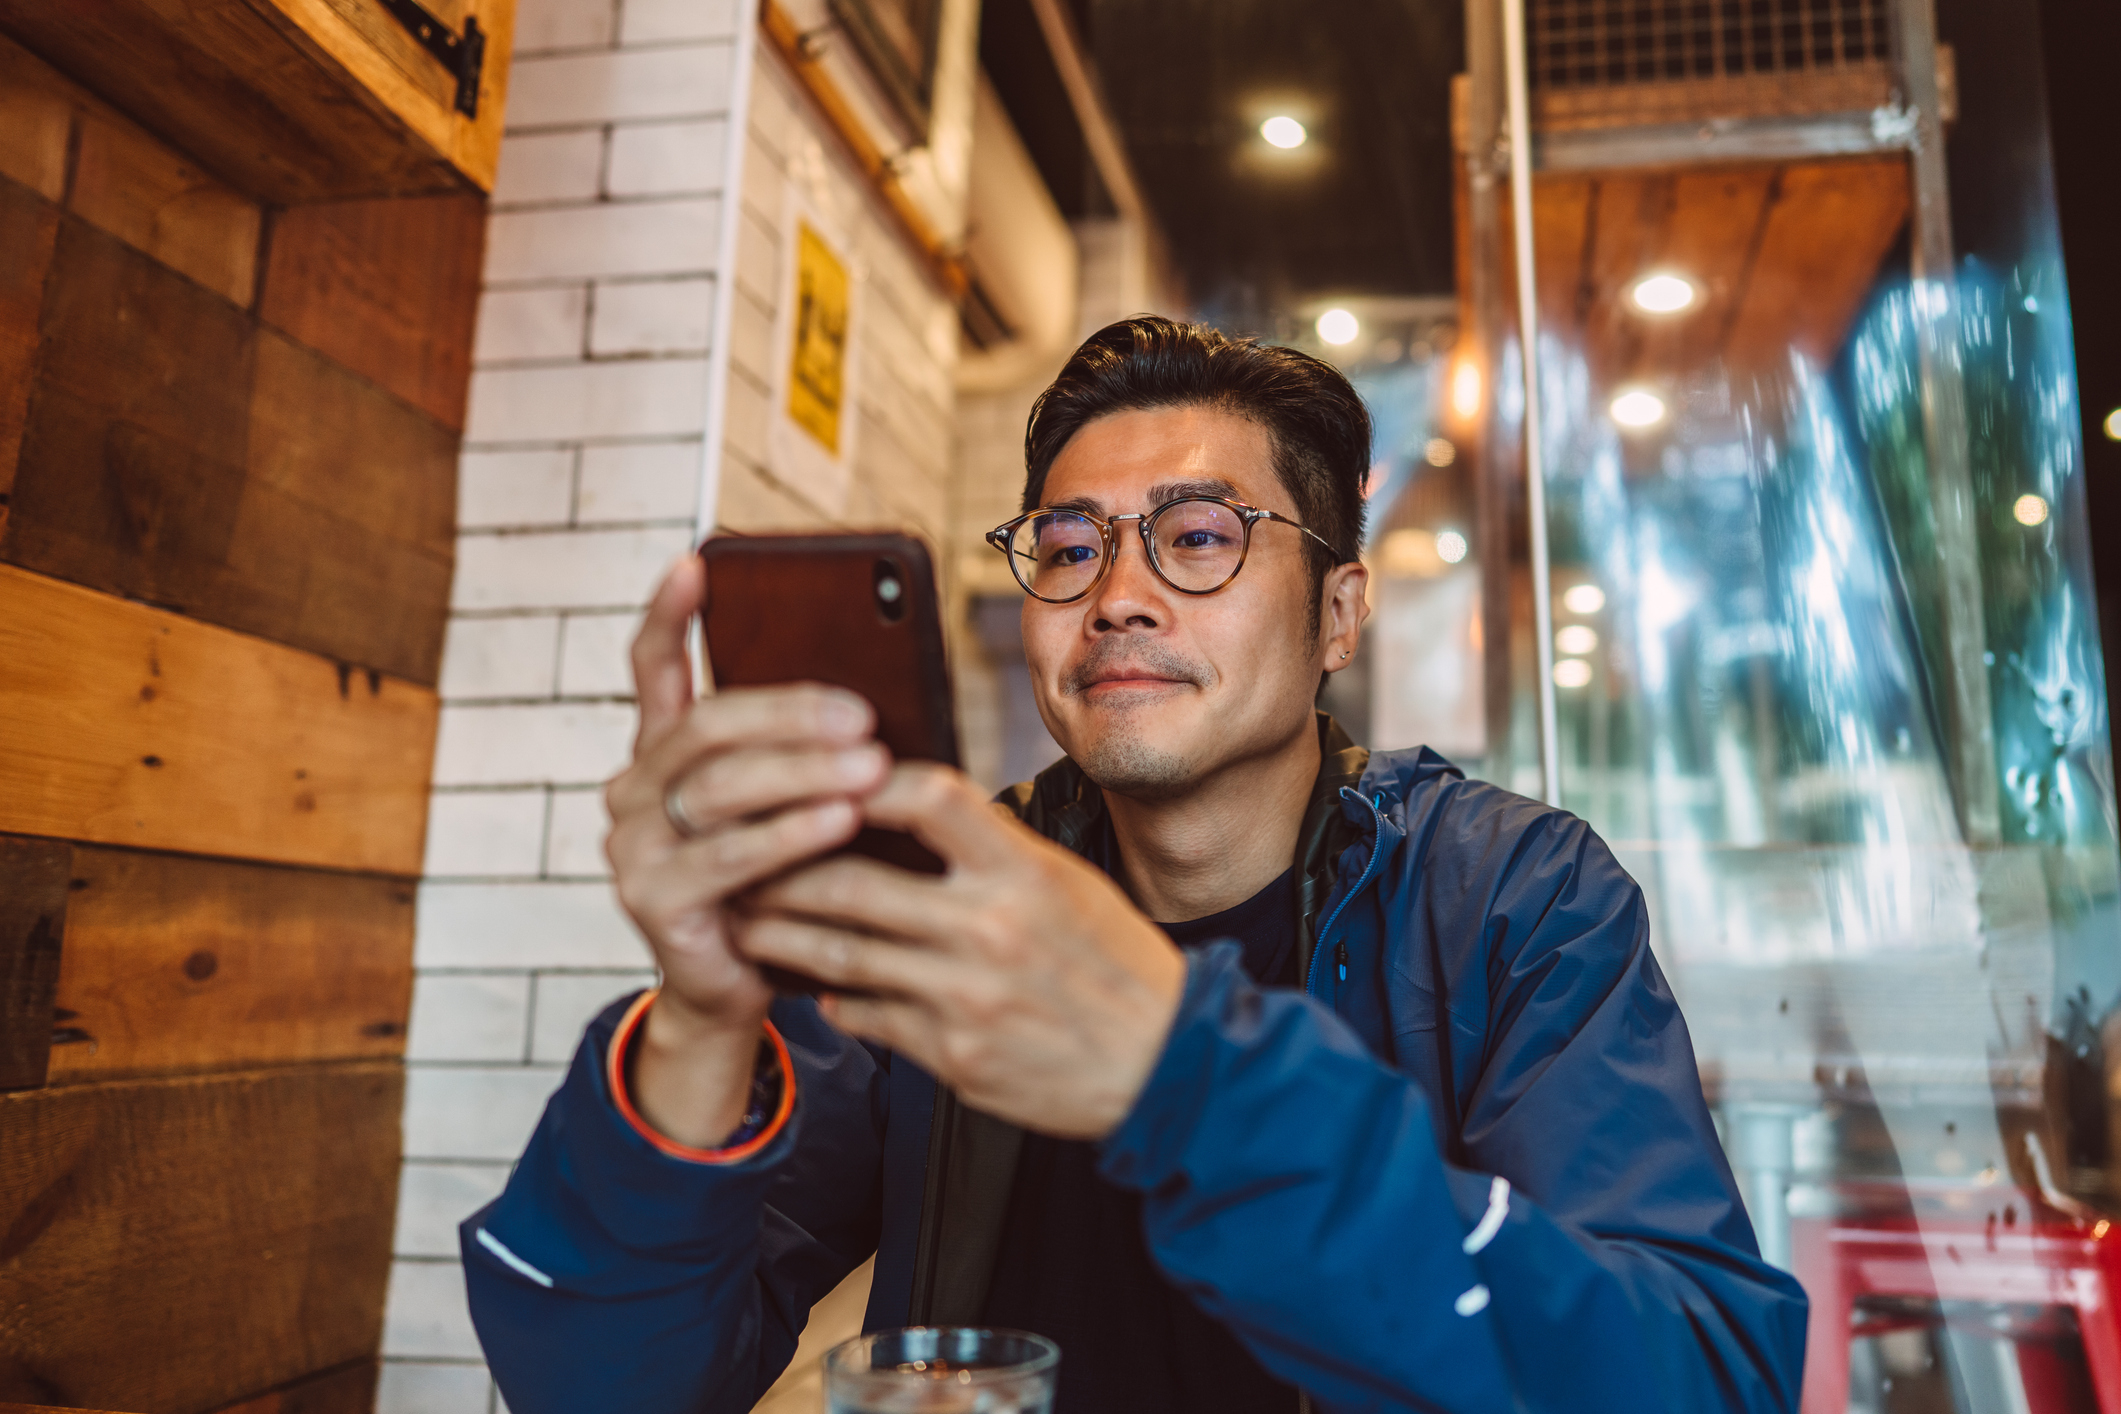 Man in glasses using smartphone at cafe table, possibly managing work or finances